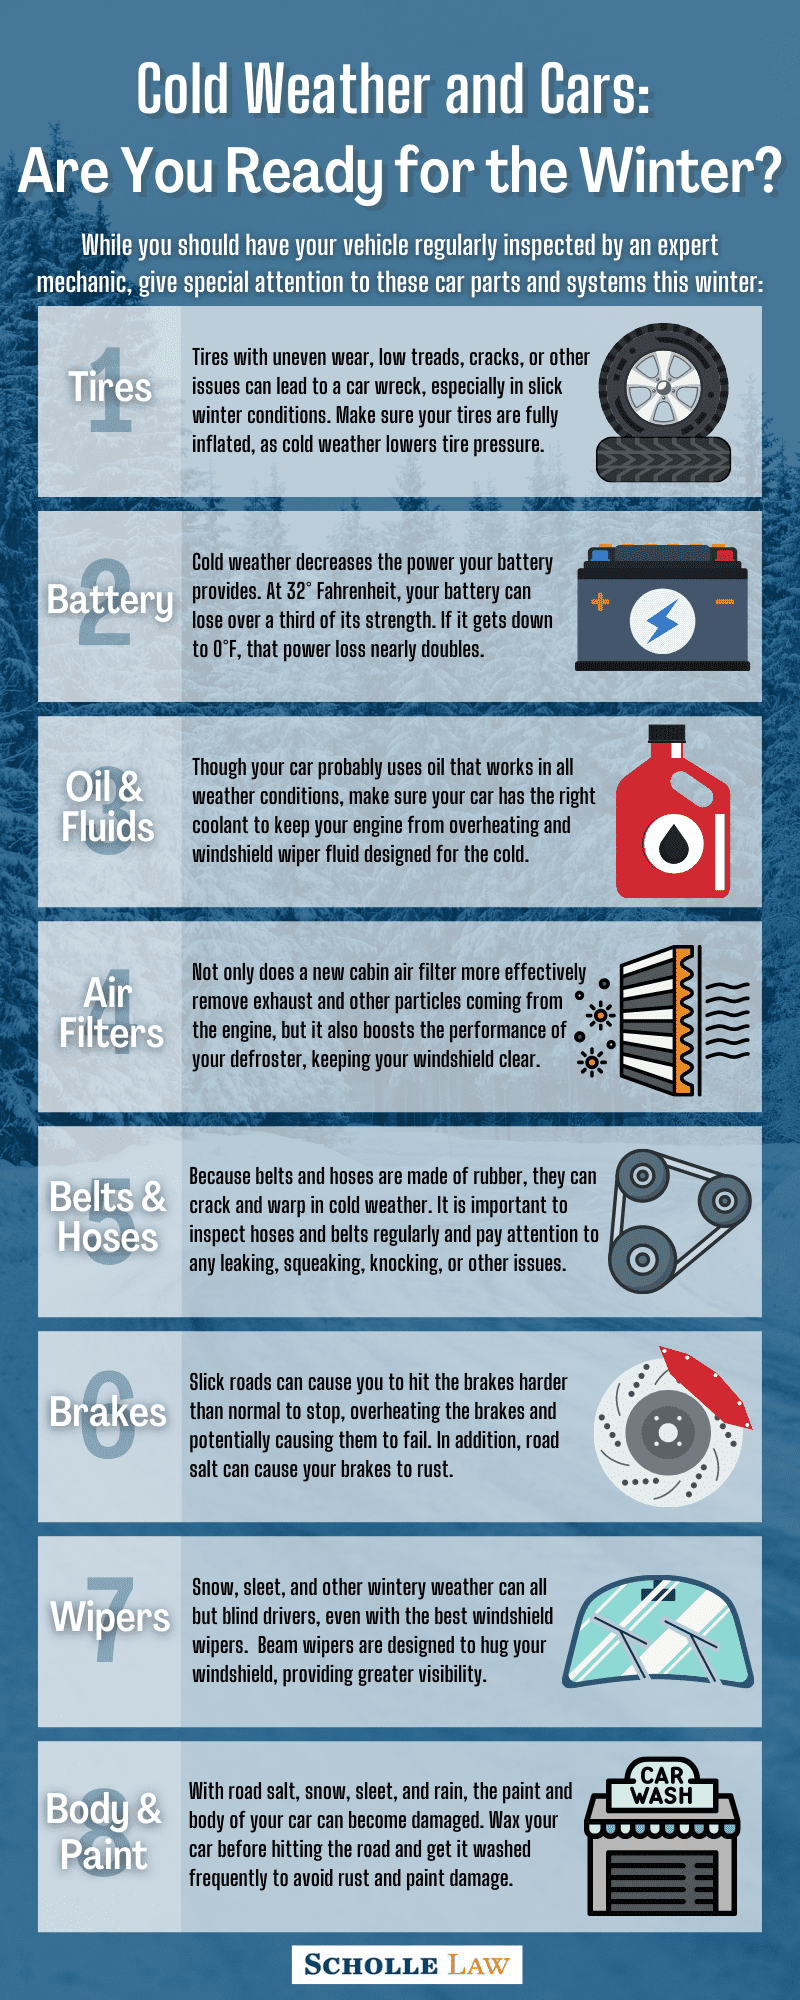 Cold Weather and Cars Are You Ready for the Winter infographic